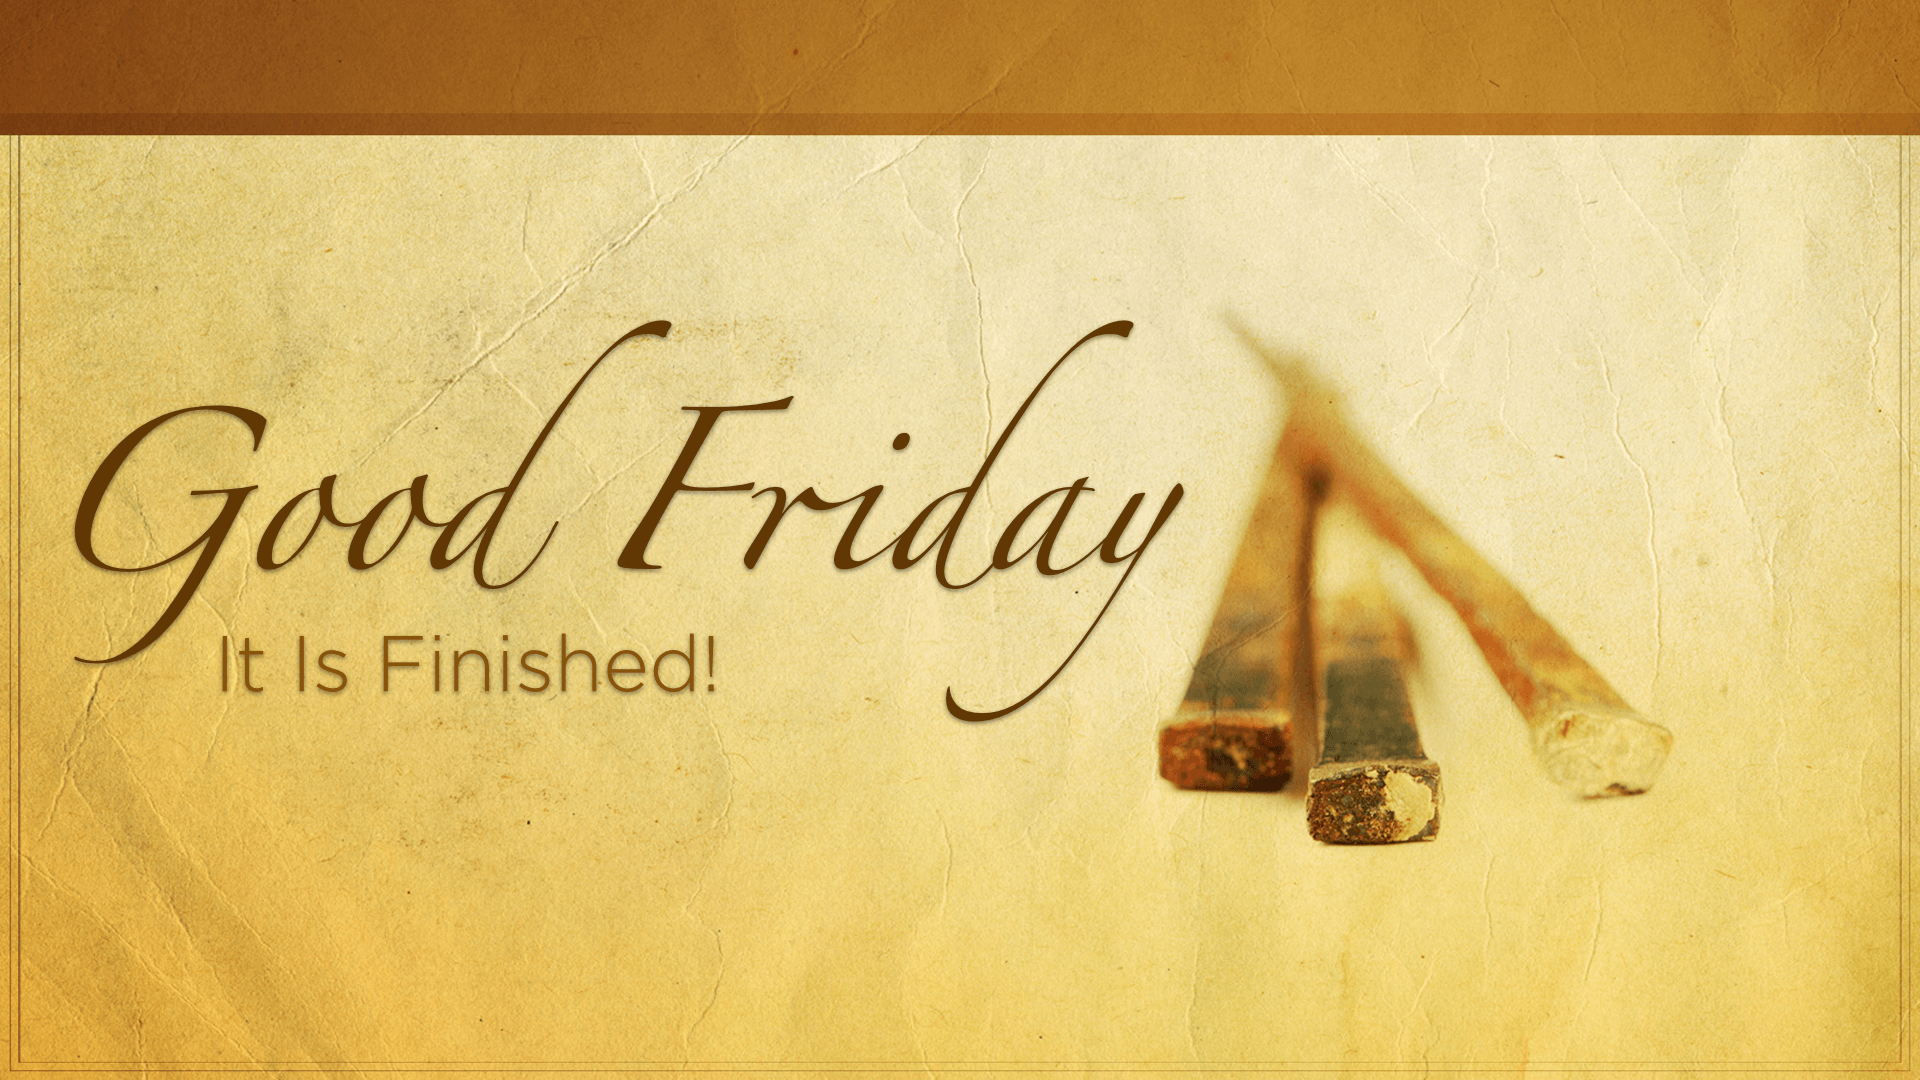 Best] Good Friday Image, Wallpaper, Photo 2018 [ Free Download ]